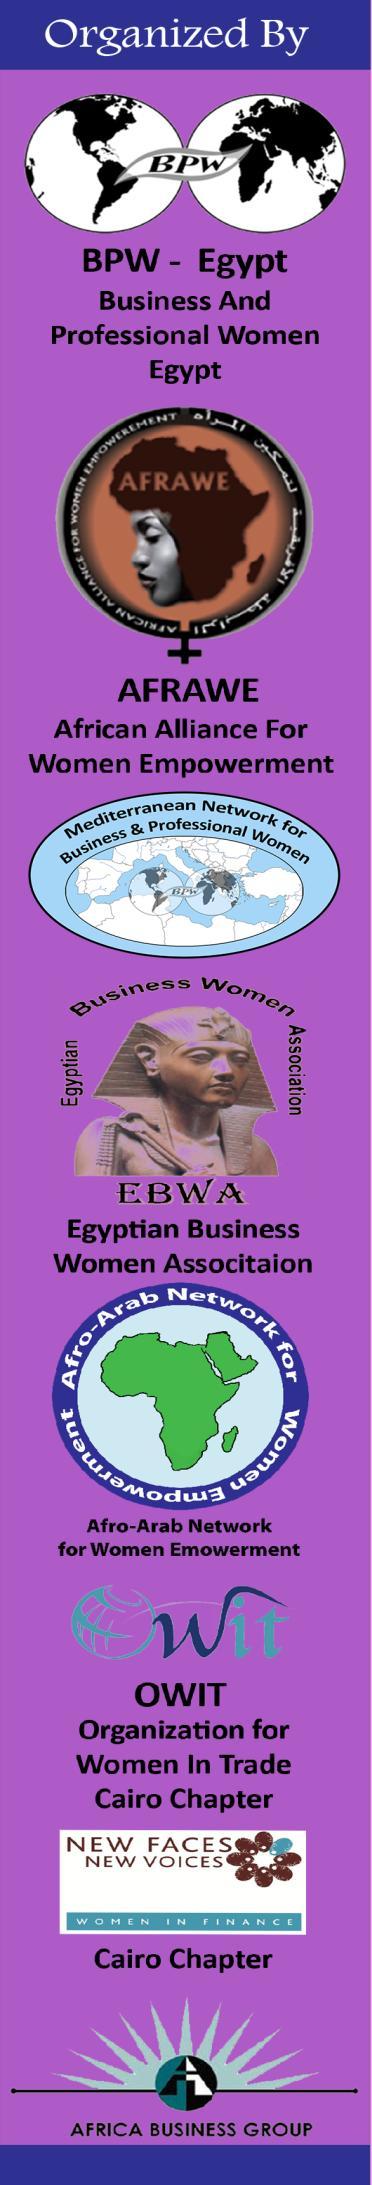 12 th African Congress for Women Entrepreneurs 5 th Anniversary of Mediterranean Network for Business & Professional Women 5 th Cairo Women Empowerment Summit In collaboration with 16 th Afro Arab